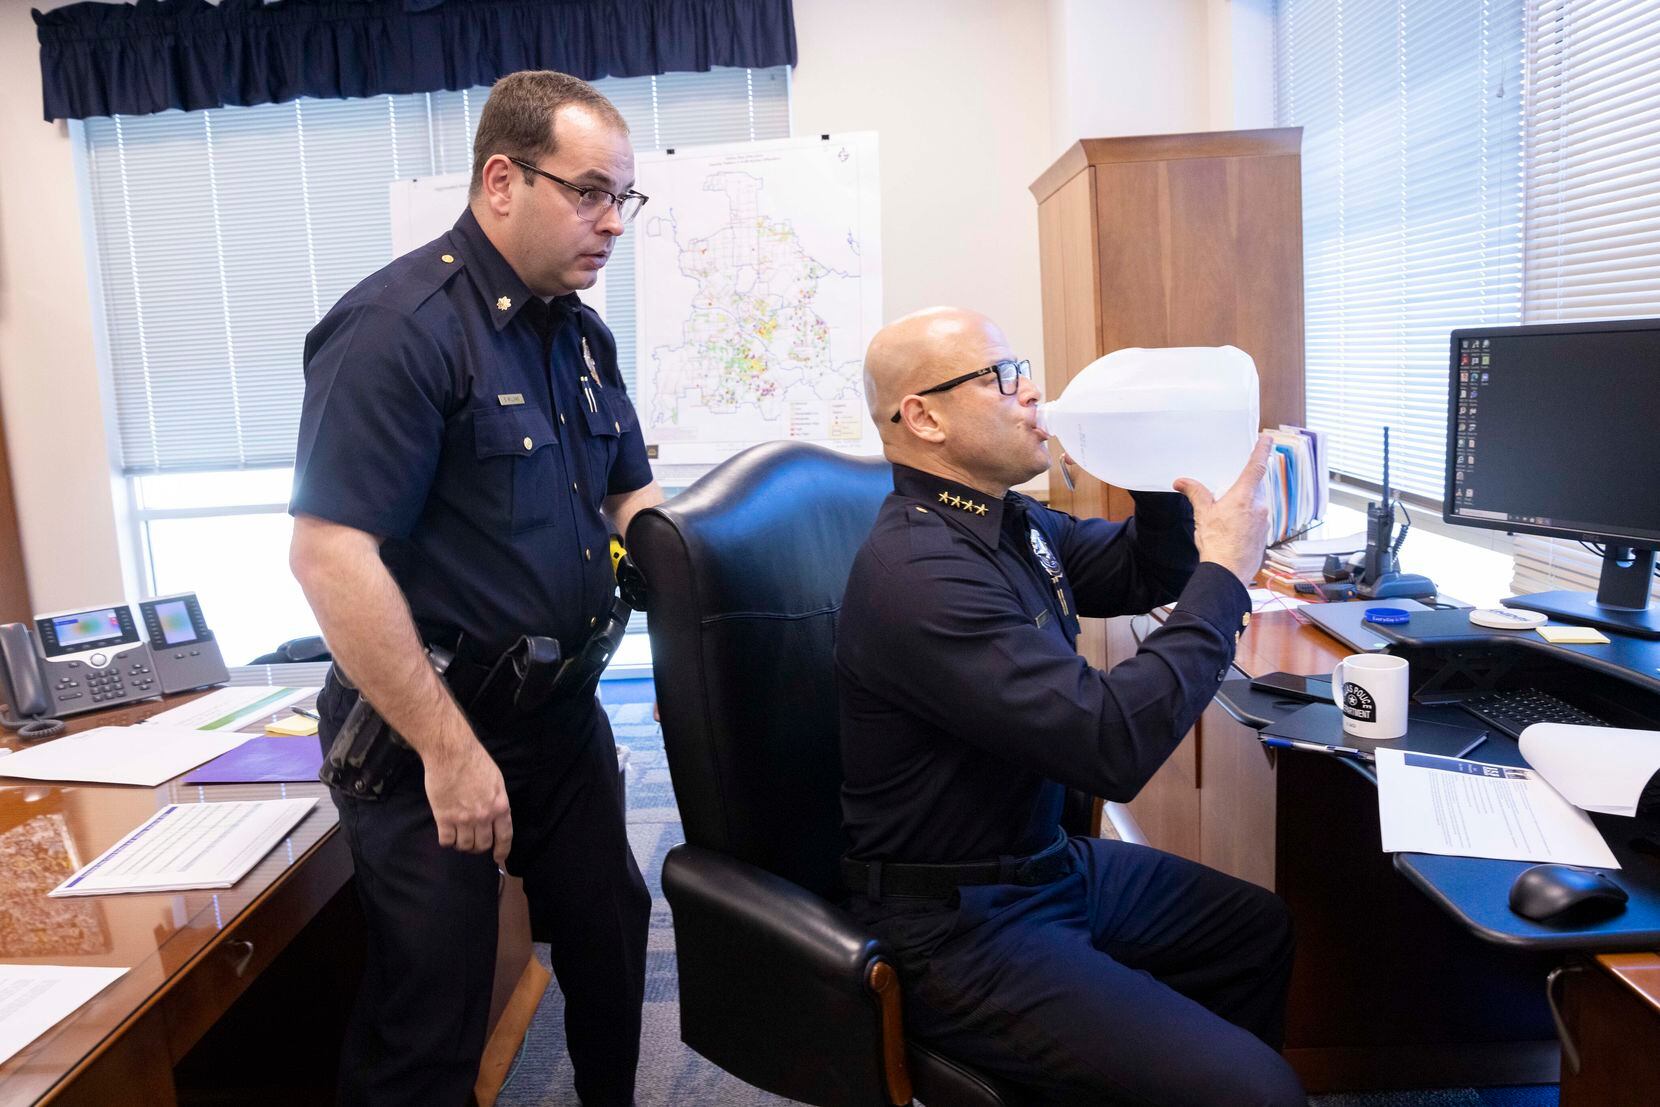 Dallas police Chief Eddie García drinks his gallon of water as Major Stephen Williams helps check García’s webcam before a video meeting with his command staff at Jack Evans Police Headquarters on Tuesday, Jan. 25, 2022, in Dallas, TX. 